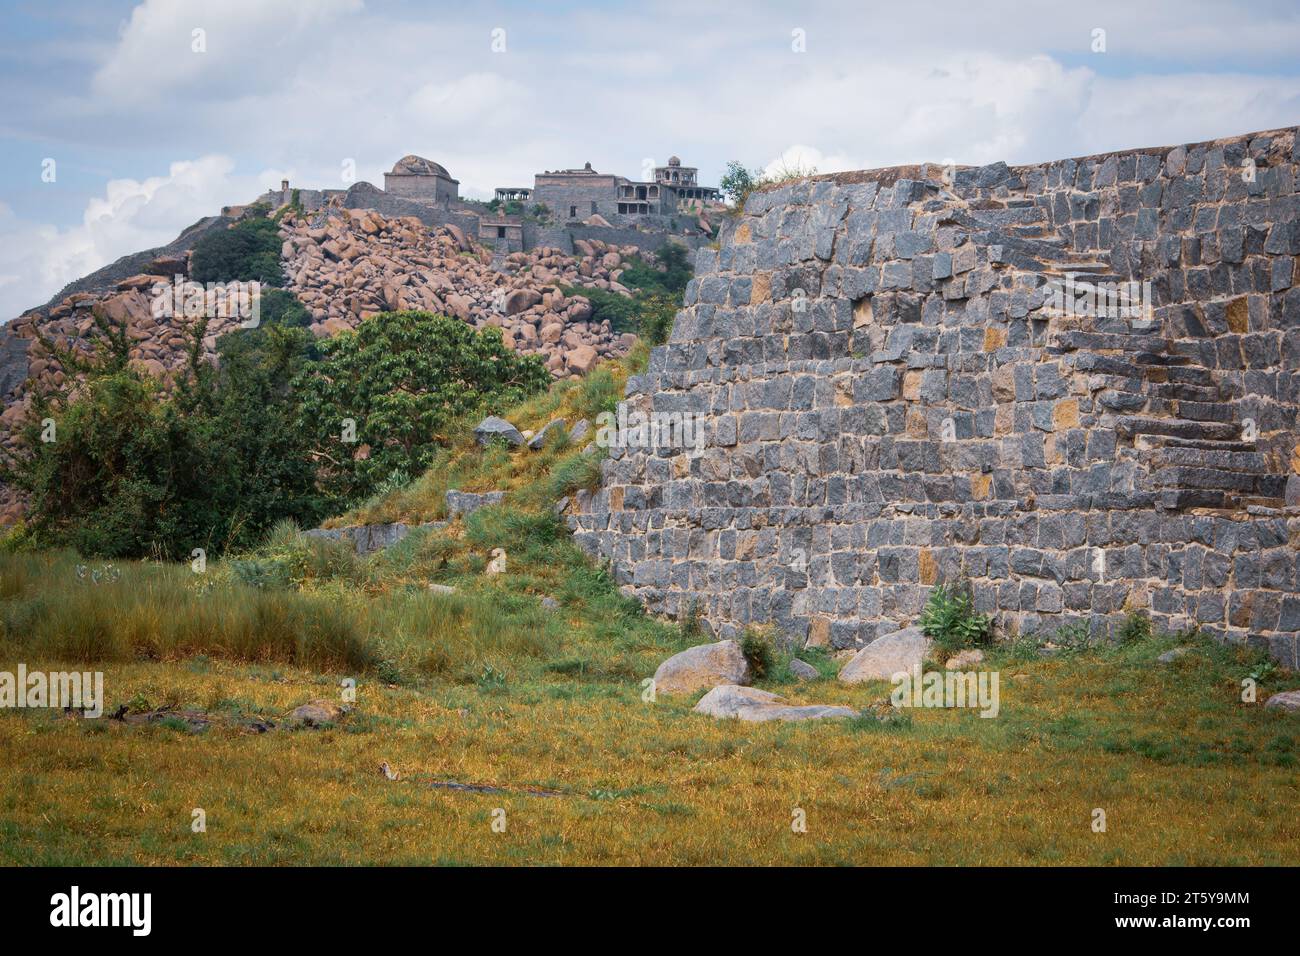 View of the Queen's fort in the Gingee Fort complex in Villupuram district, Tamil Nadu, India. Focus set on hill rocks. Stock Photo